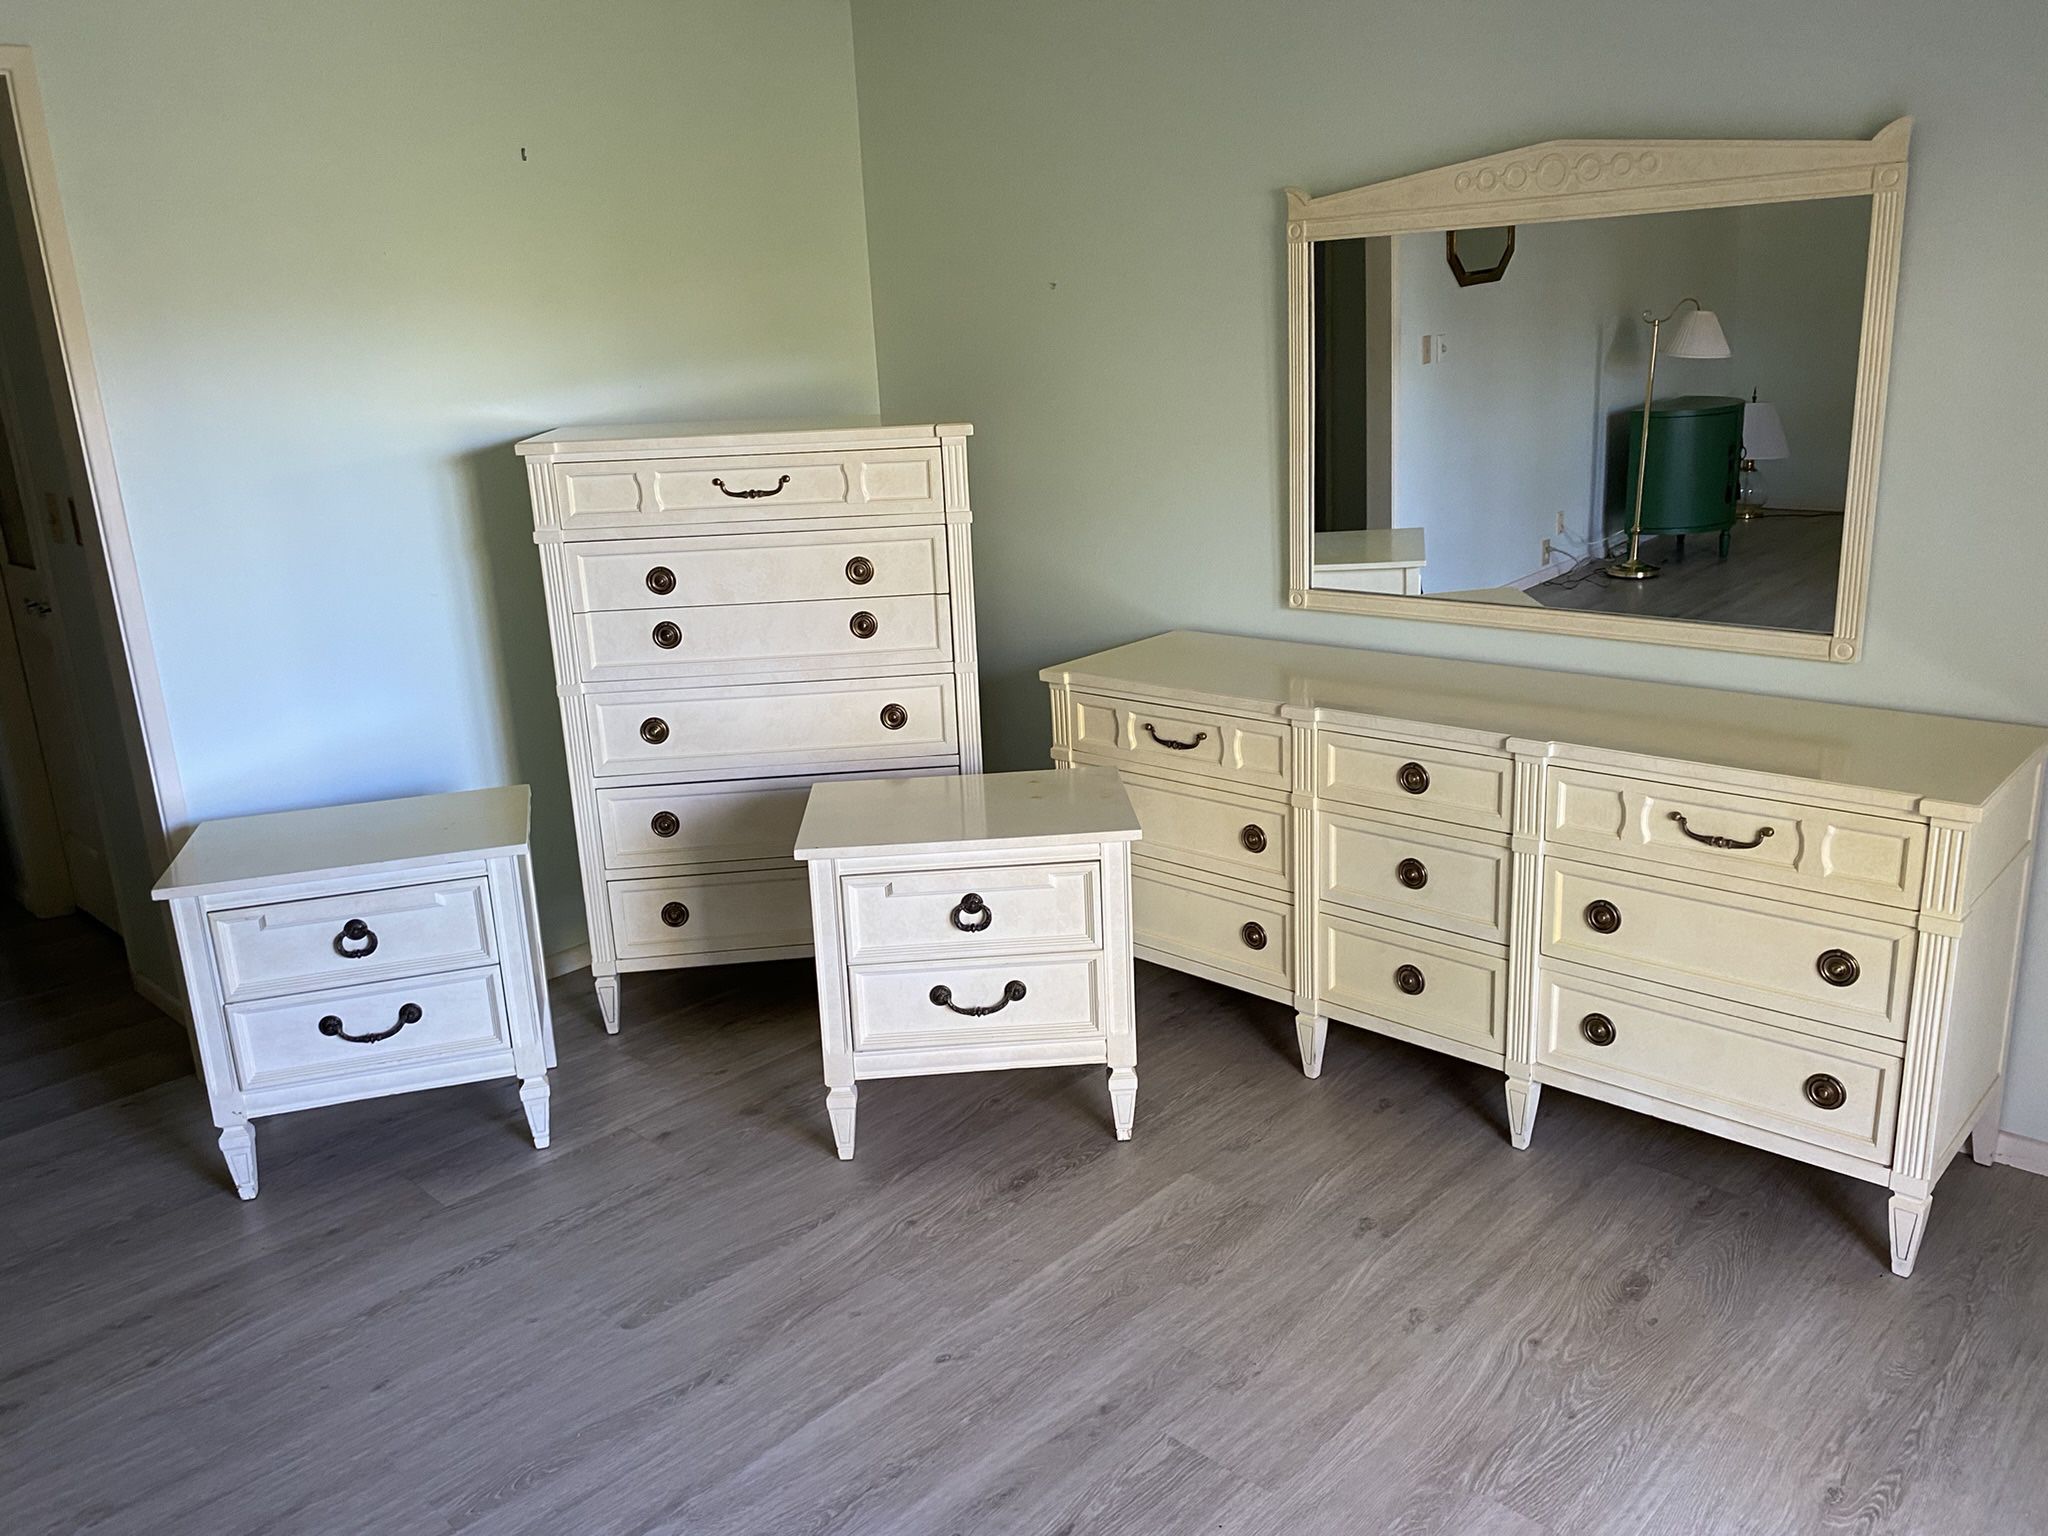 Vintage American Of Martinsville Bedroom Set. ITS AVAILABLE 